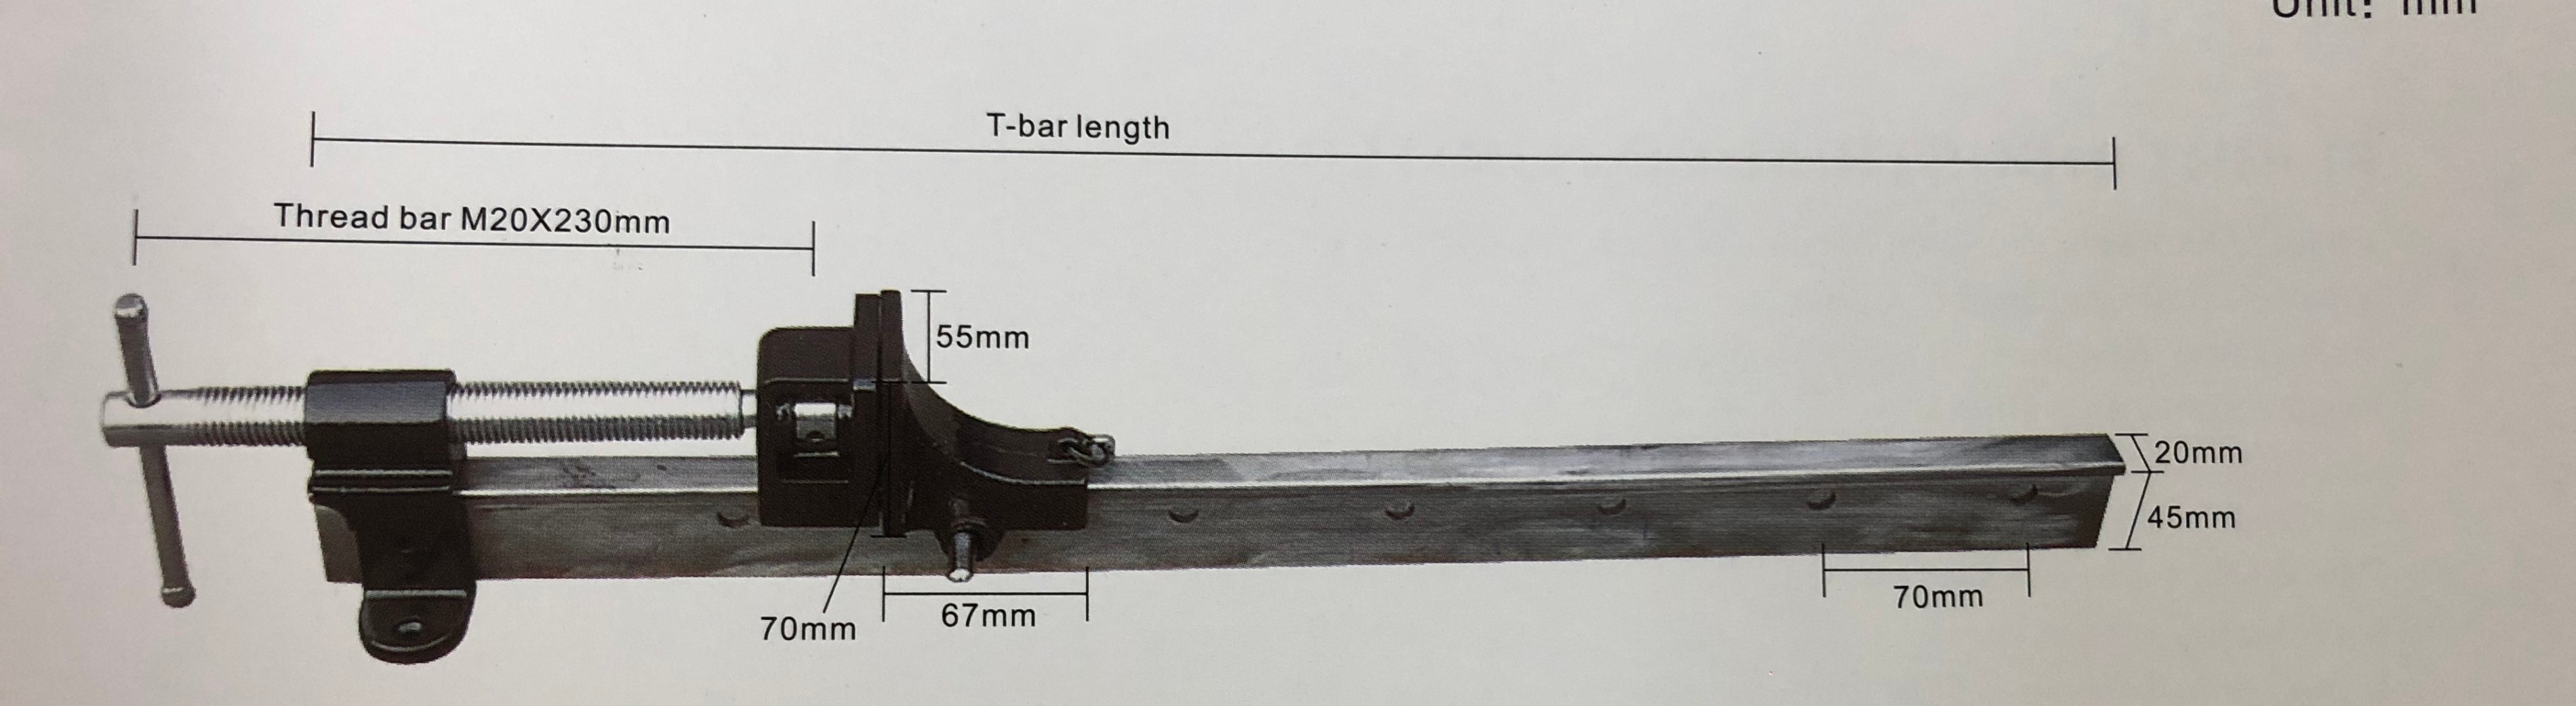 Woodworkiing T-bar clamp